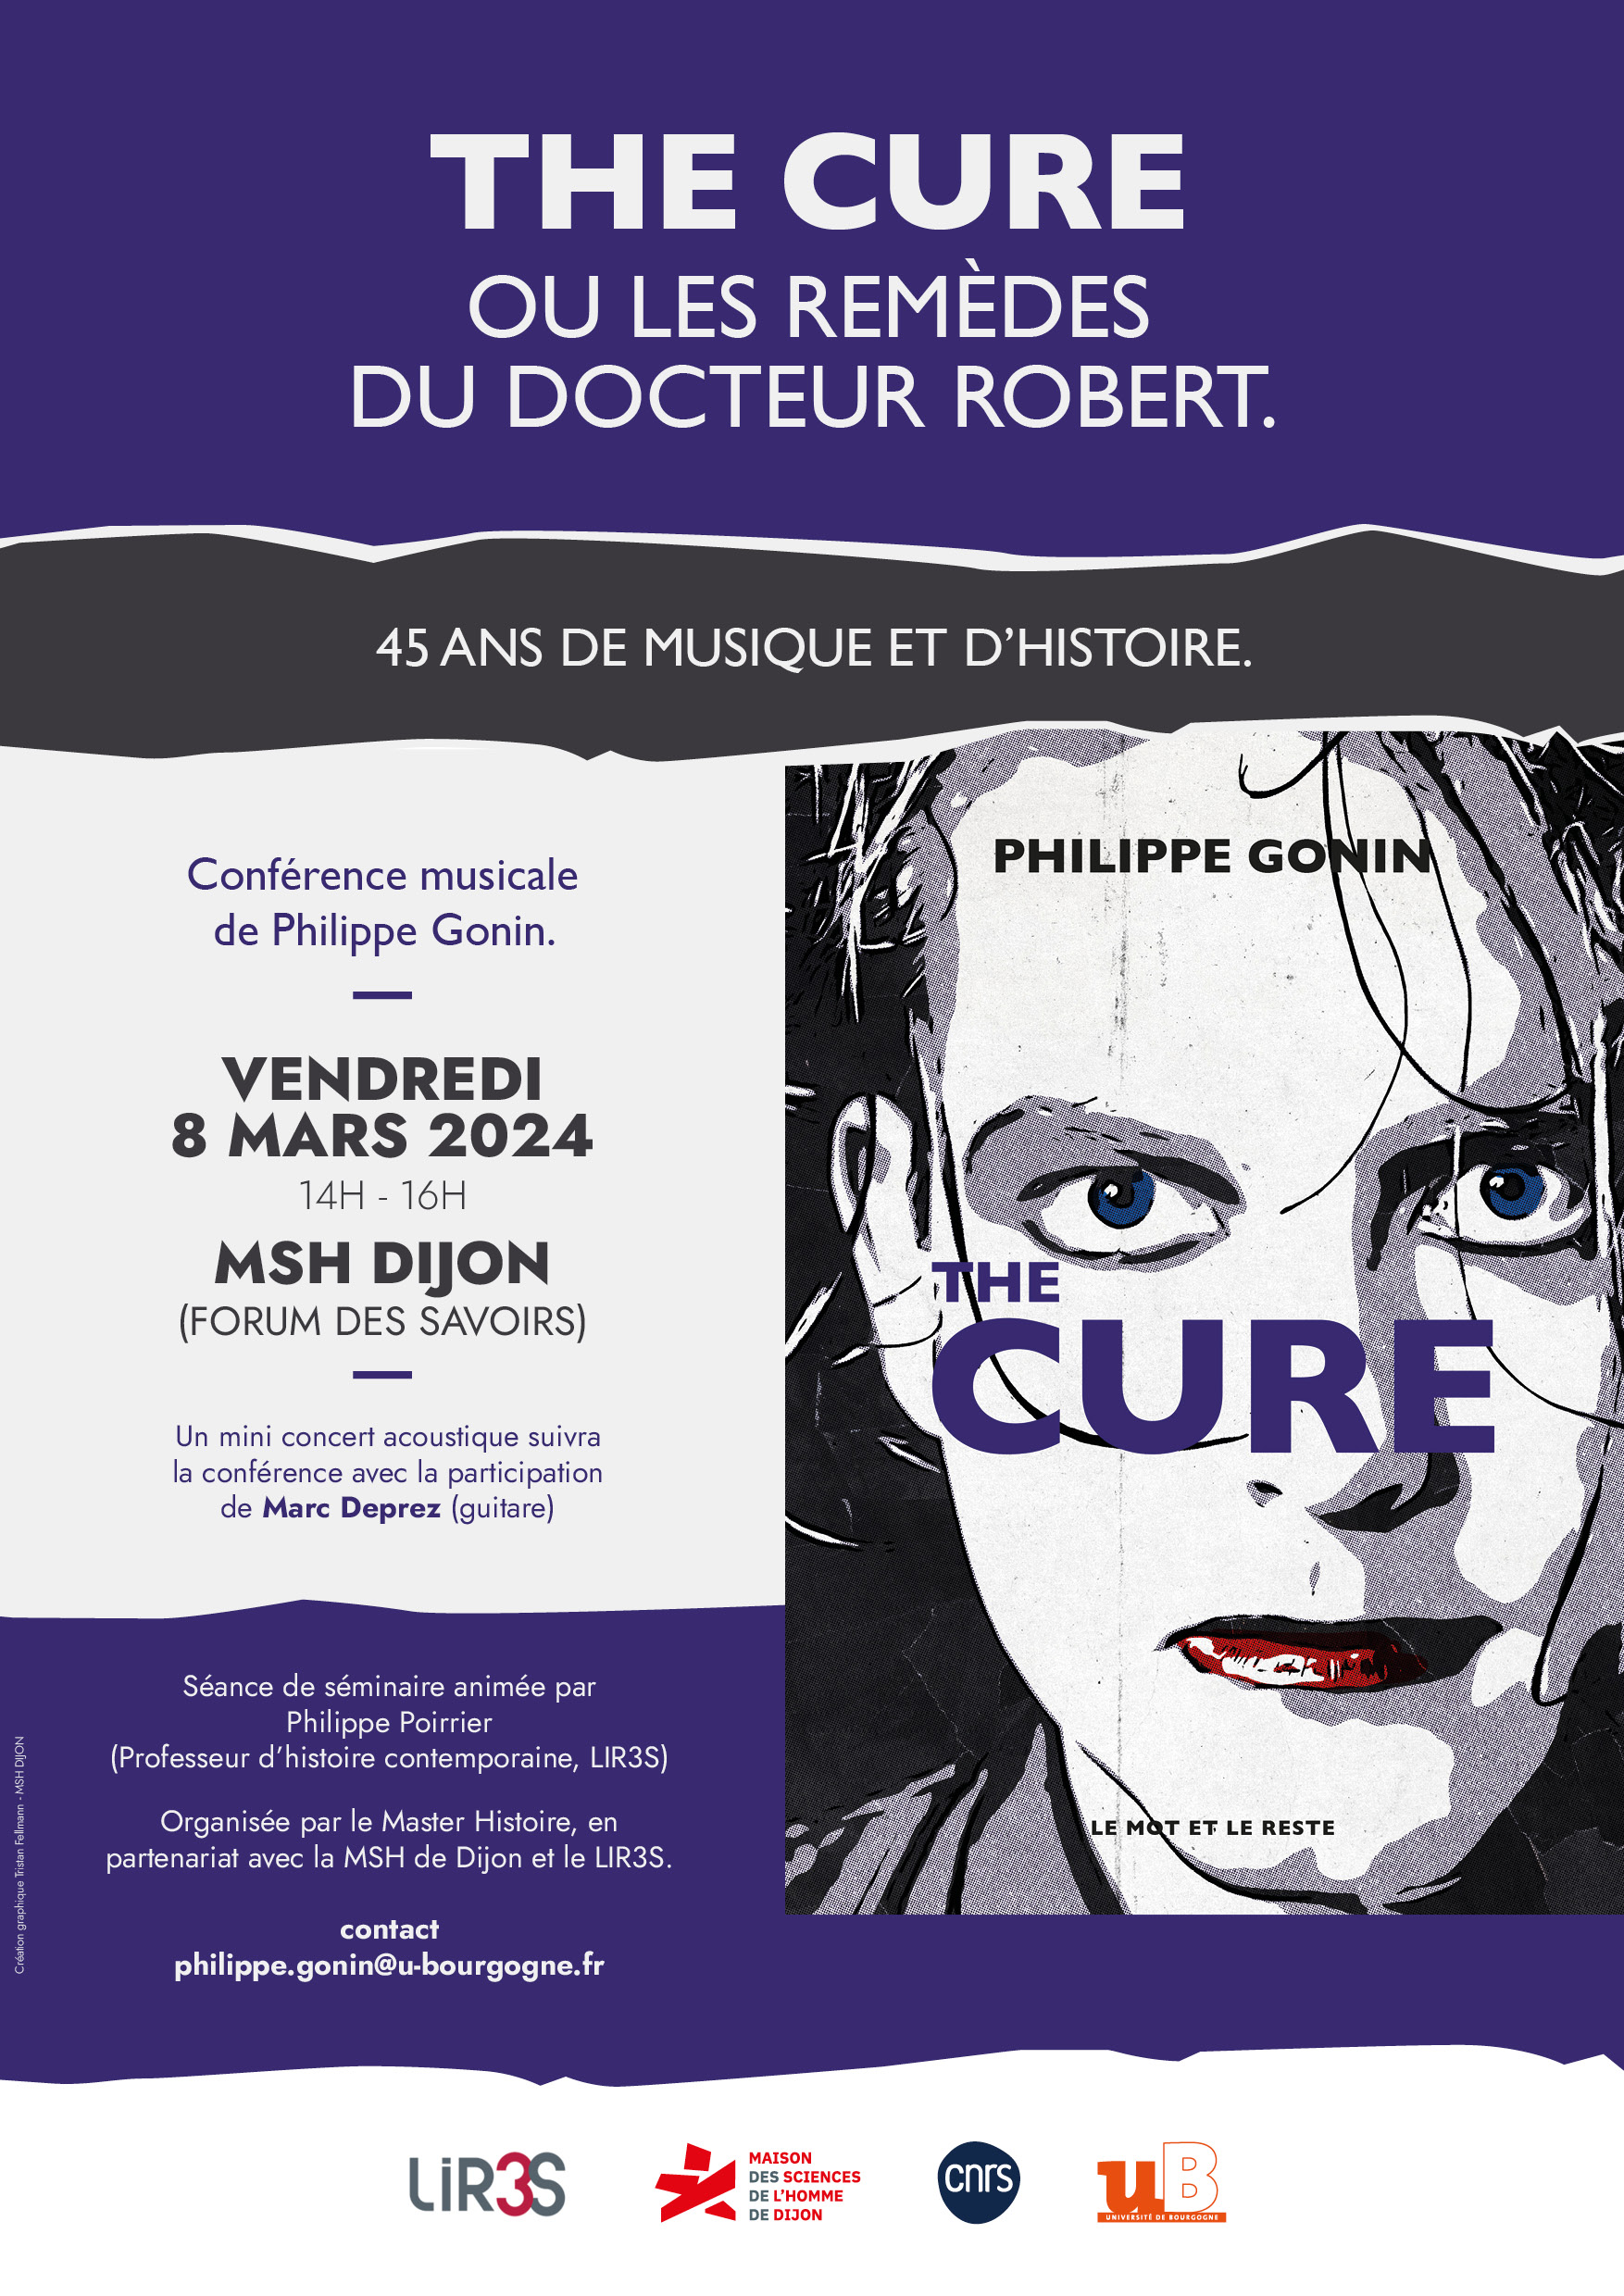 Conférence musicale de Philippe Gonin : The Cure